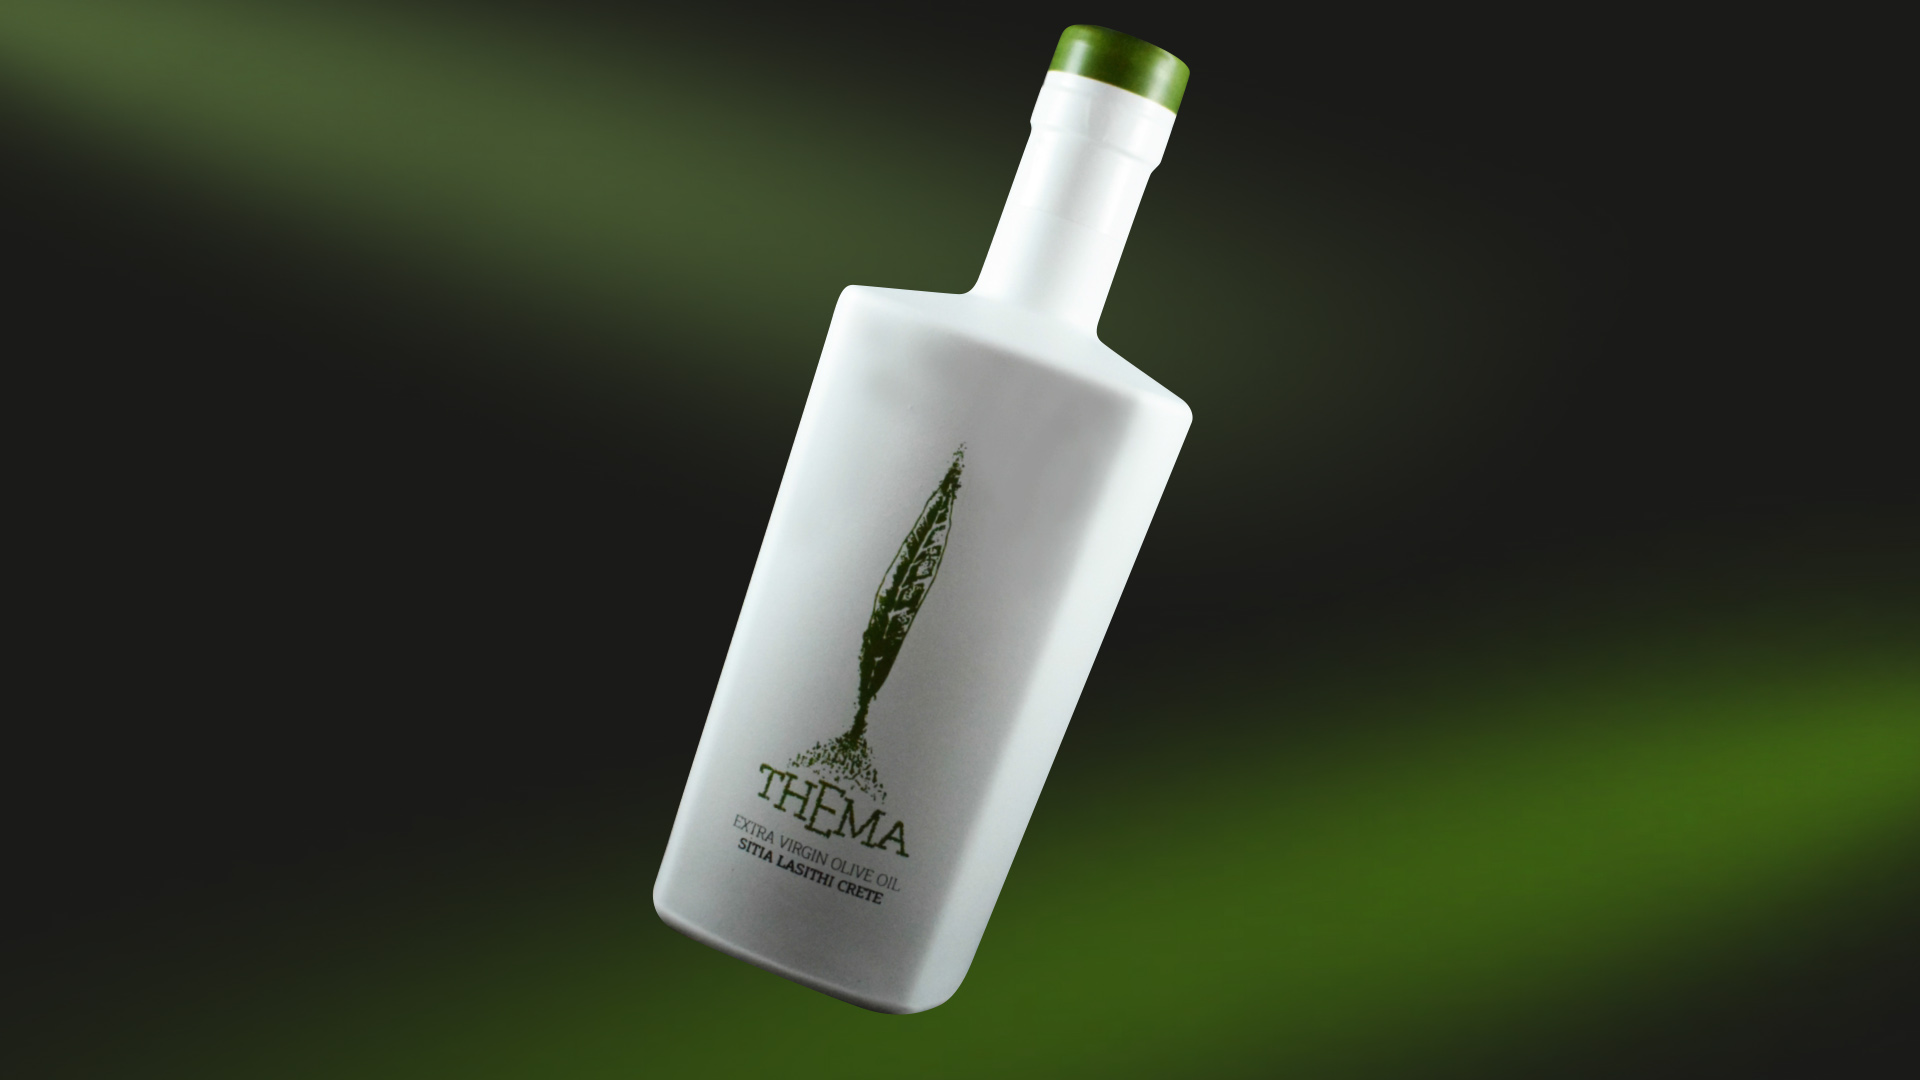 Thema Extra Virgin Olive Oil